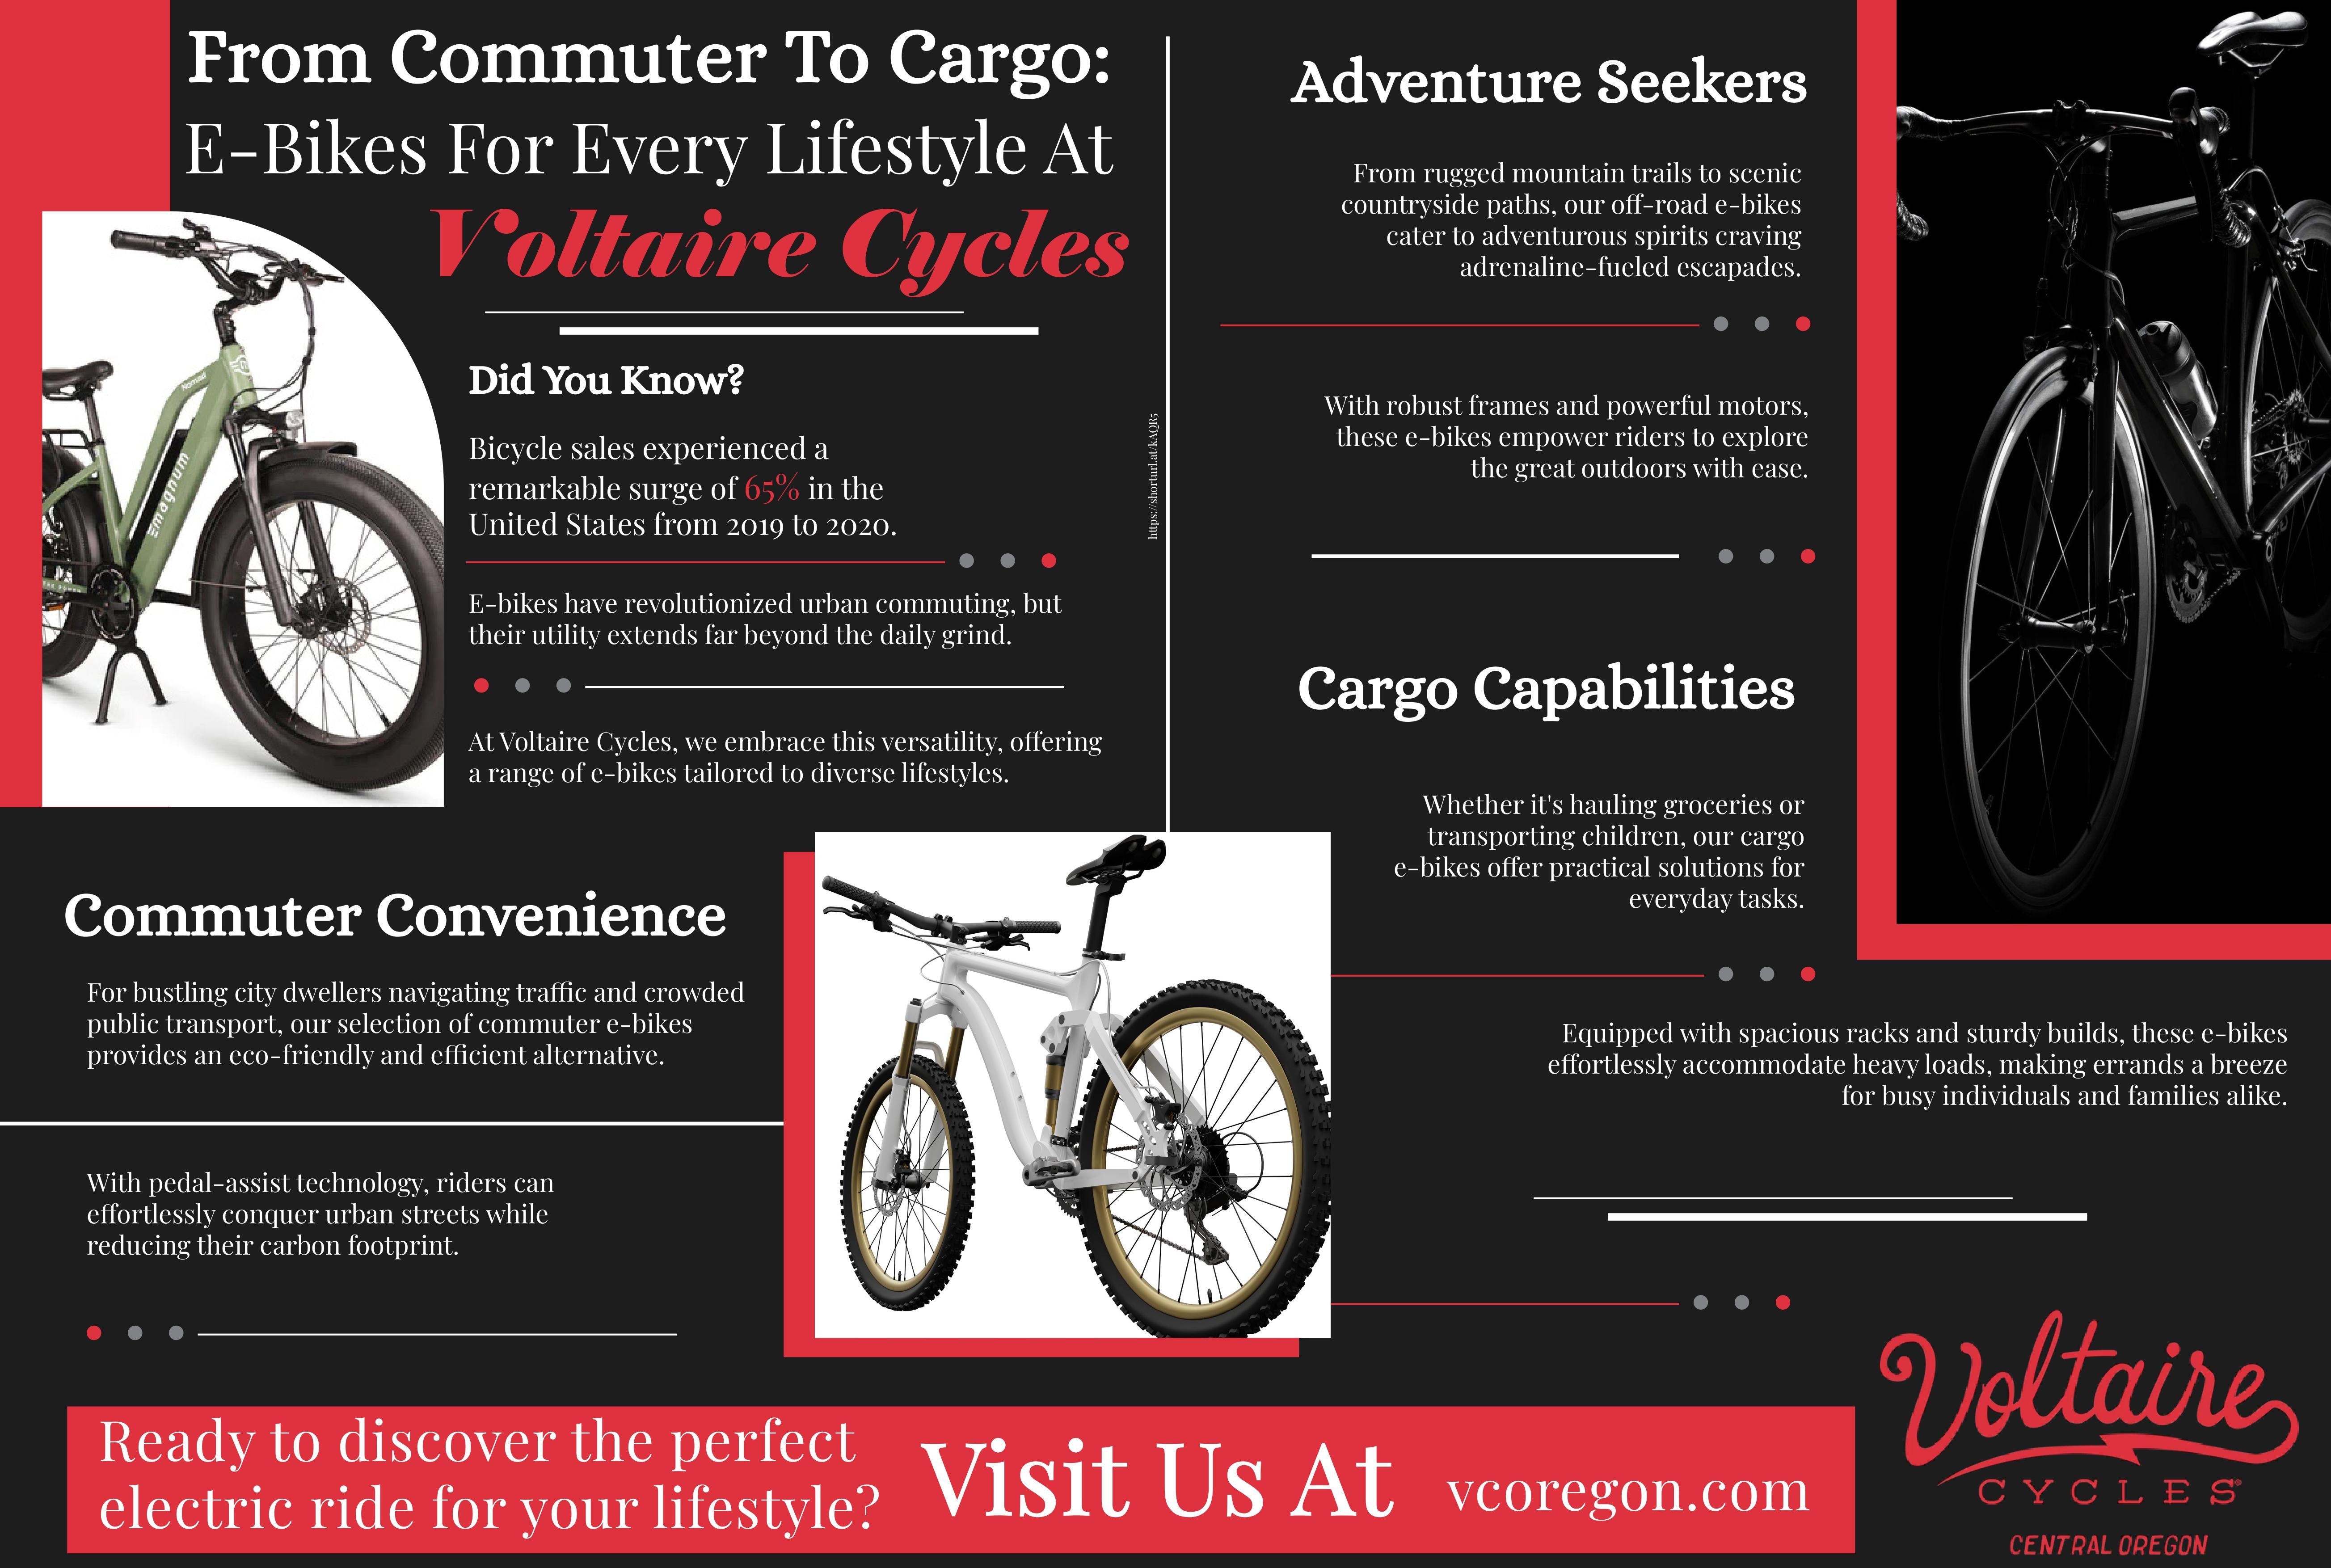 From Commuter to Cargo: E-Bikes for Every Lifestyle at Voltaire Cycles-INFOGRAPHIC